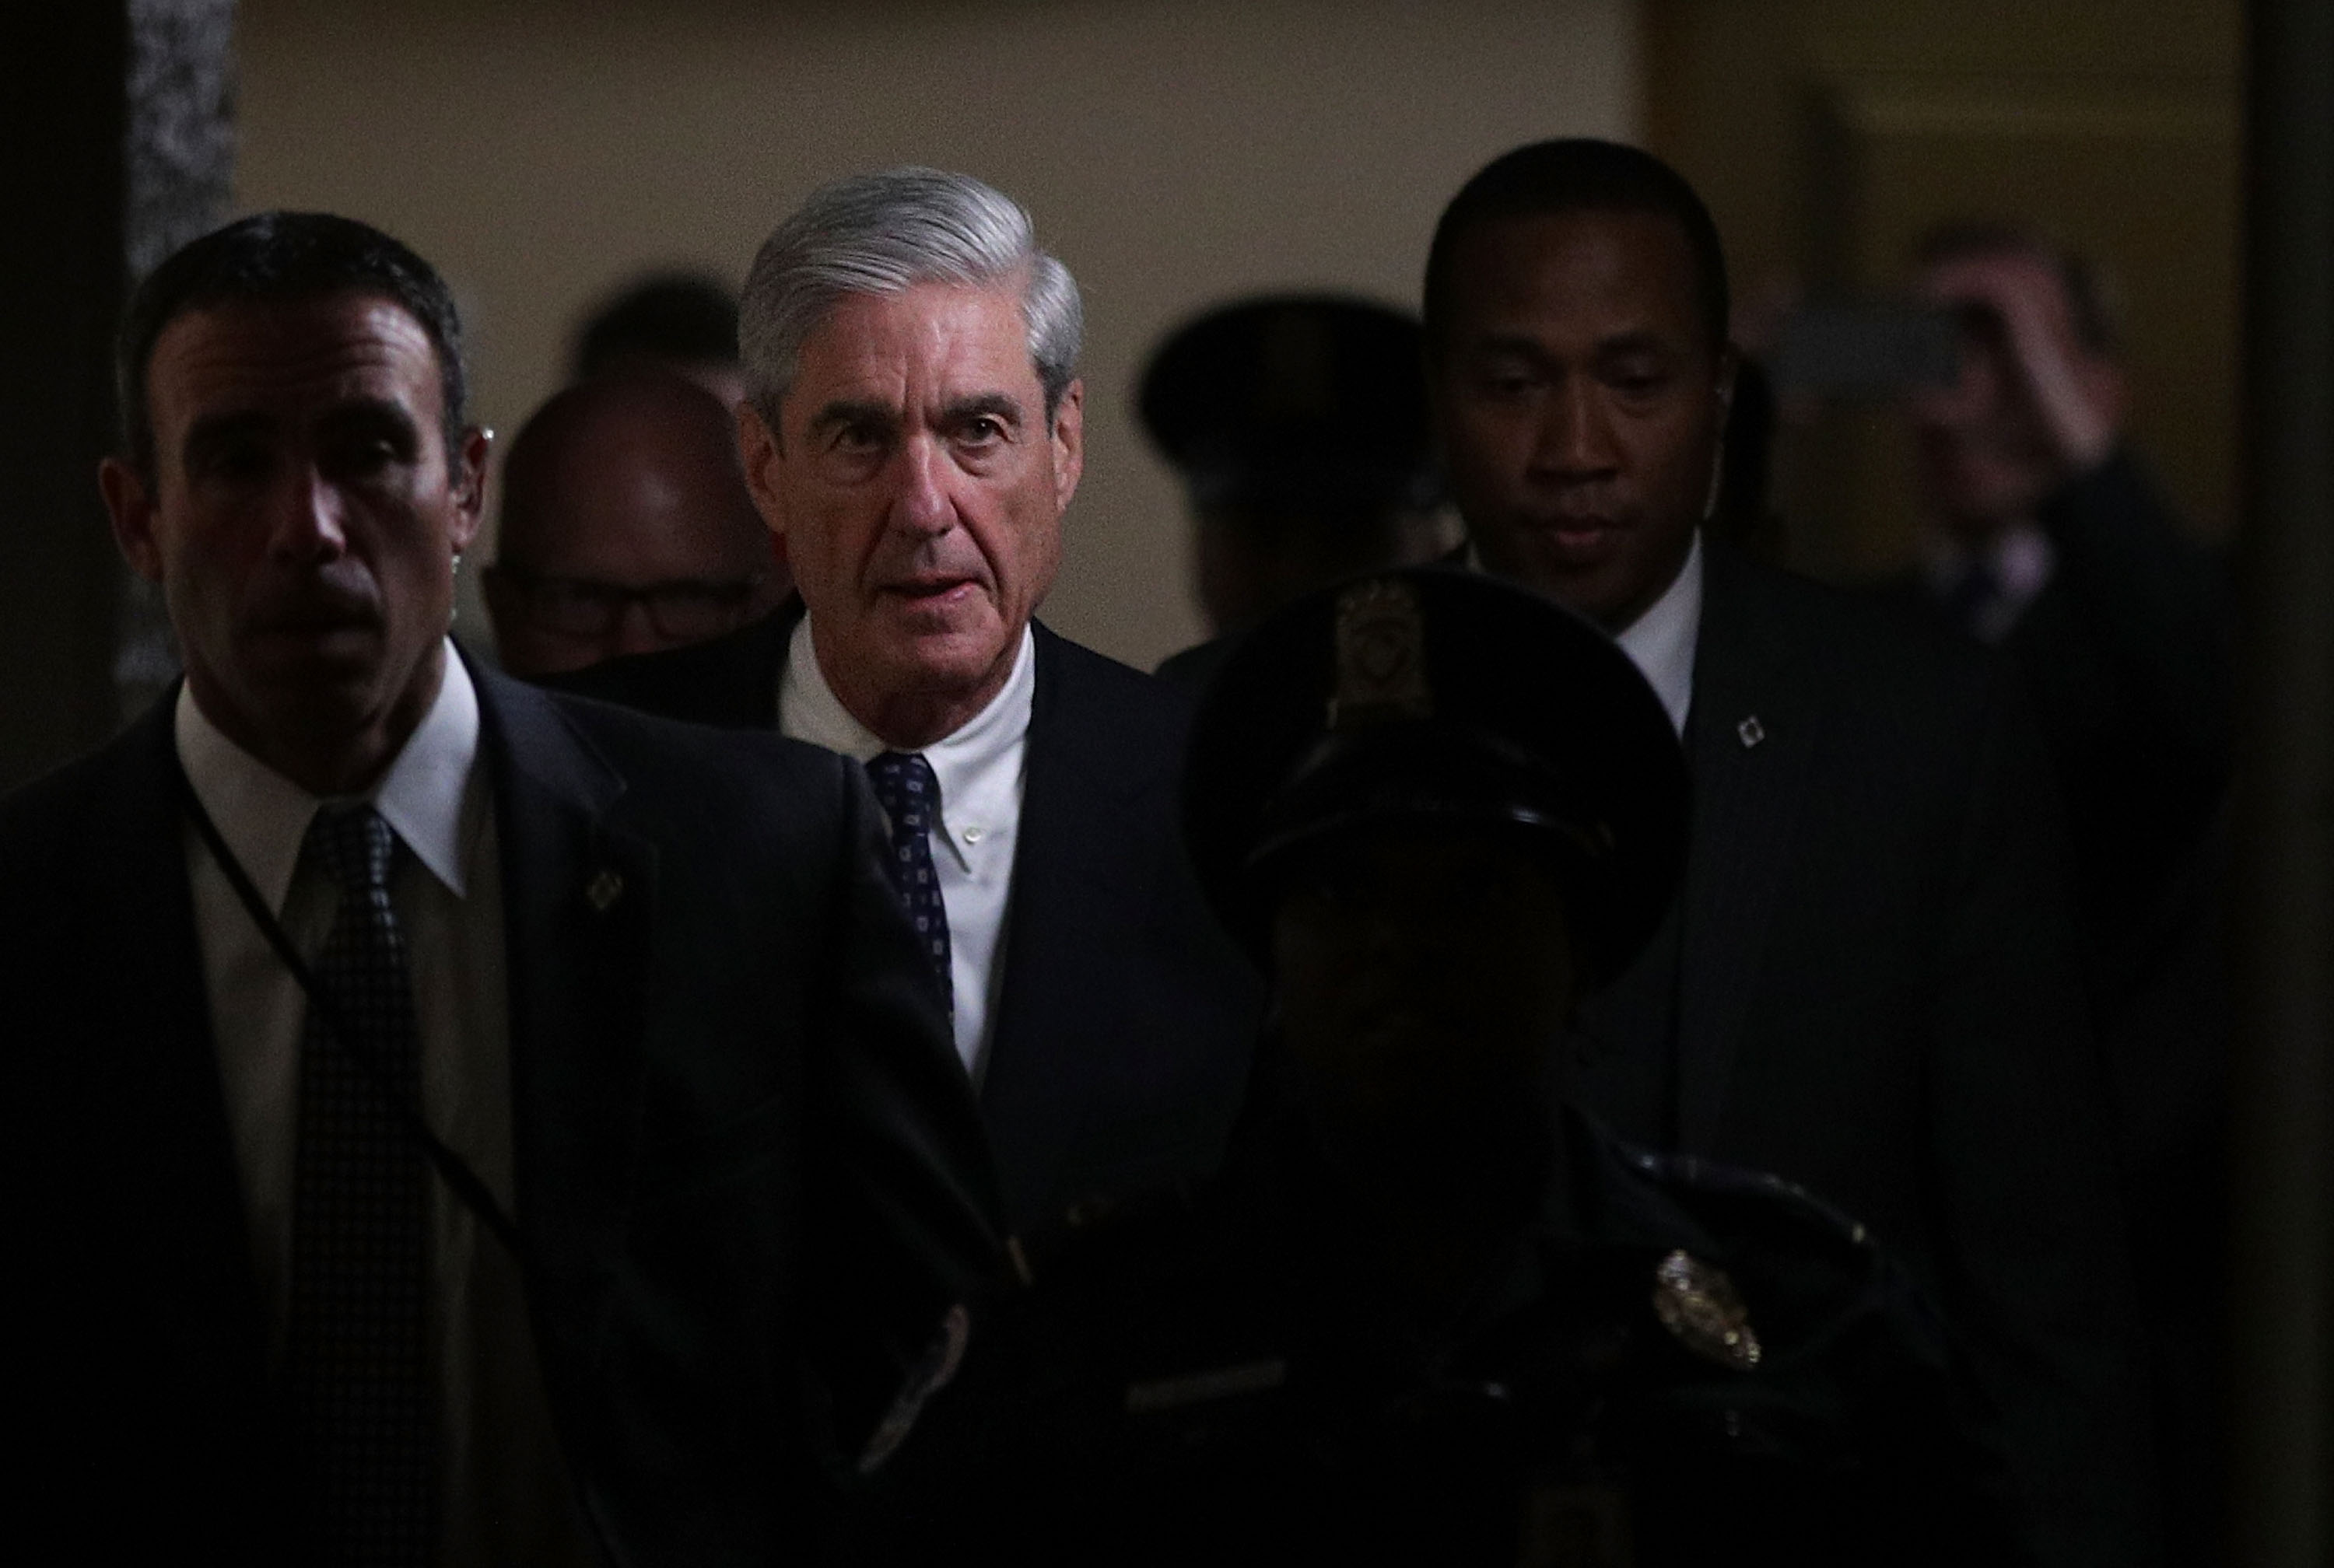 Special counsel Robert Mueller leaves after a closed meeting with members of the Senate Judiciary Committee on June 21, 2017, in Washington, D.C. (Alex Wong&mdash;Getty Images)